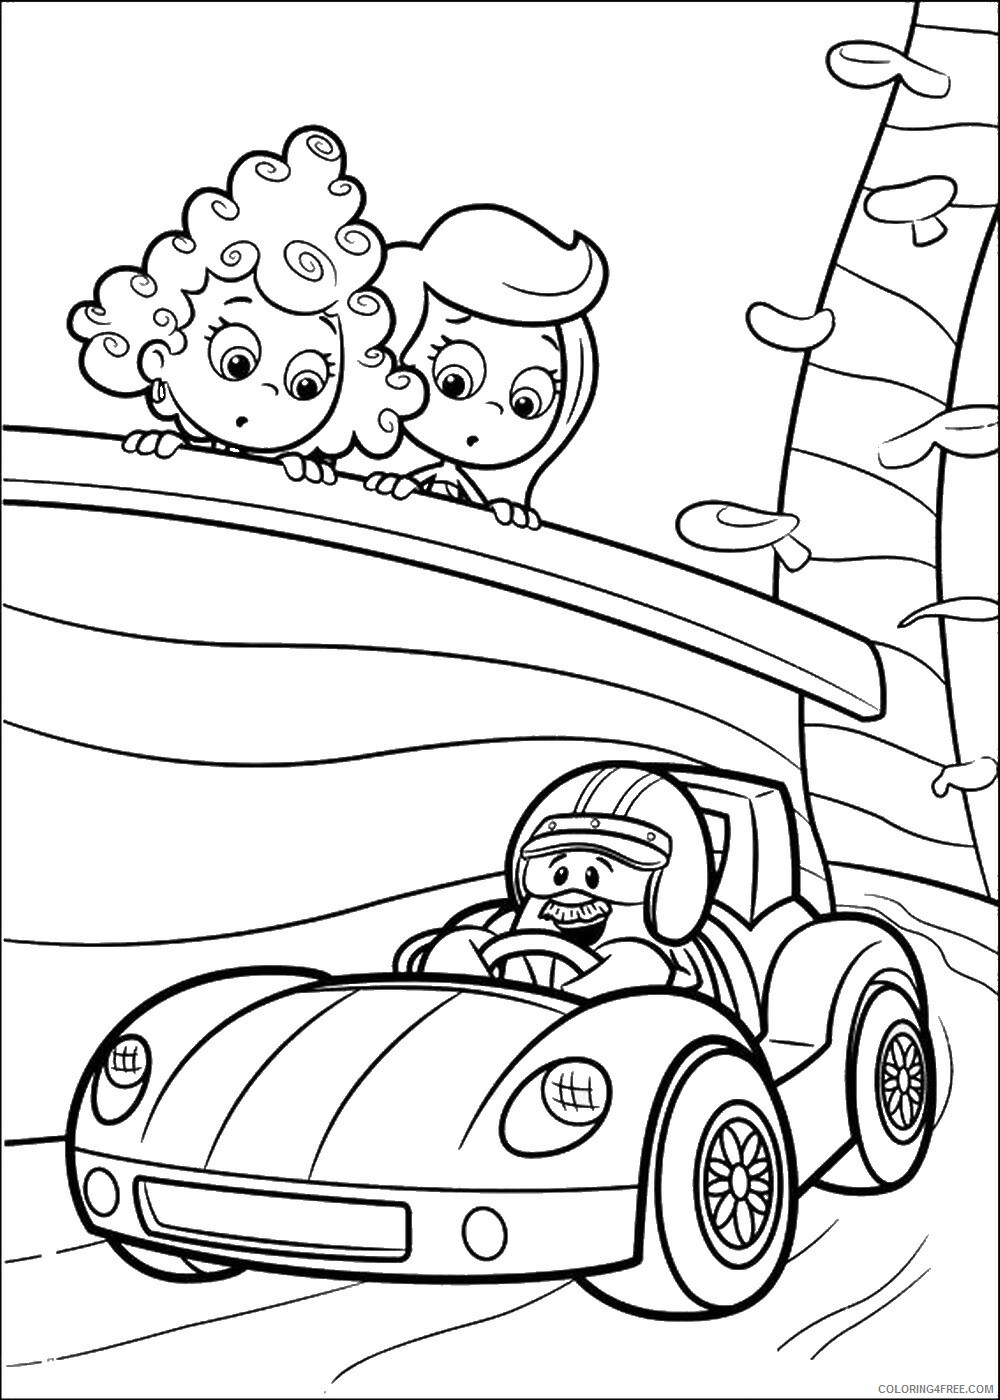 Bubble Guppies Coloring Pages TV Film bubble_guppies_cl10 Printable 2020 01541 Coloring4free